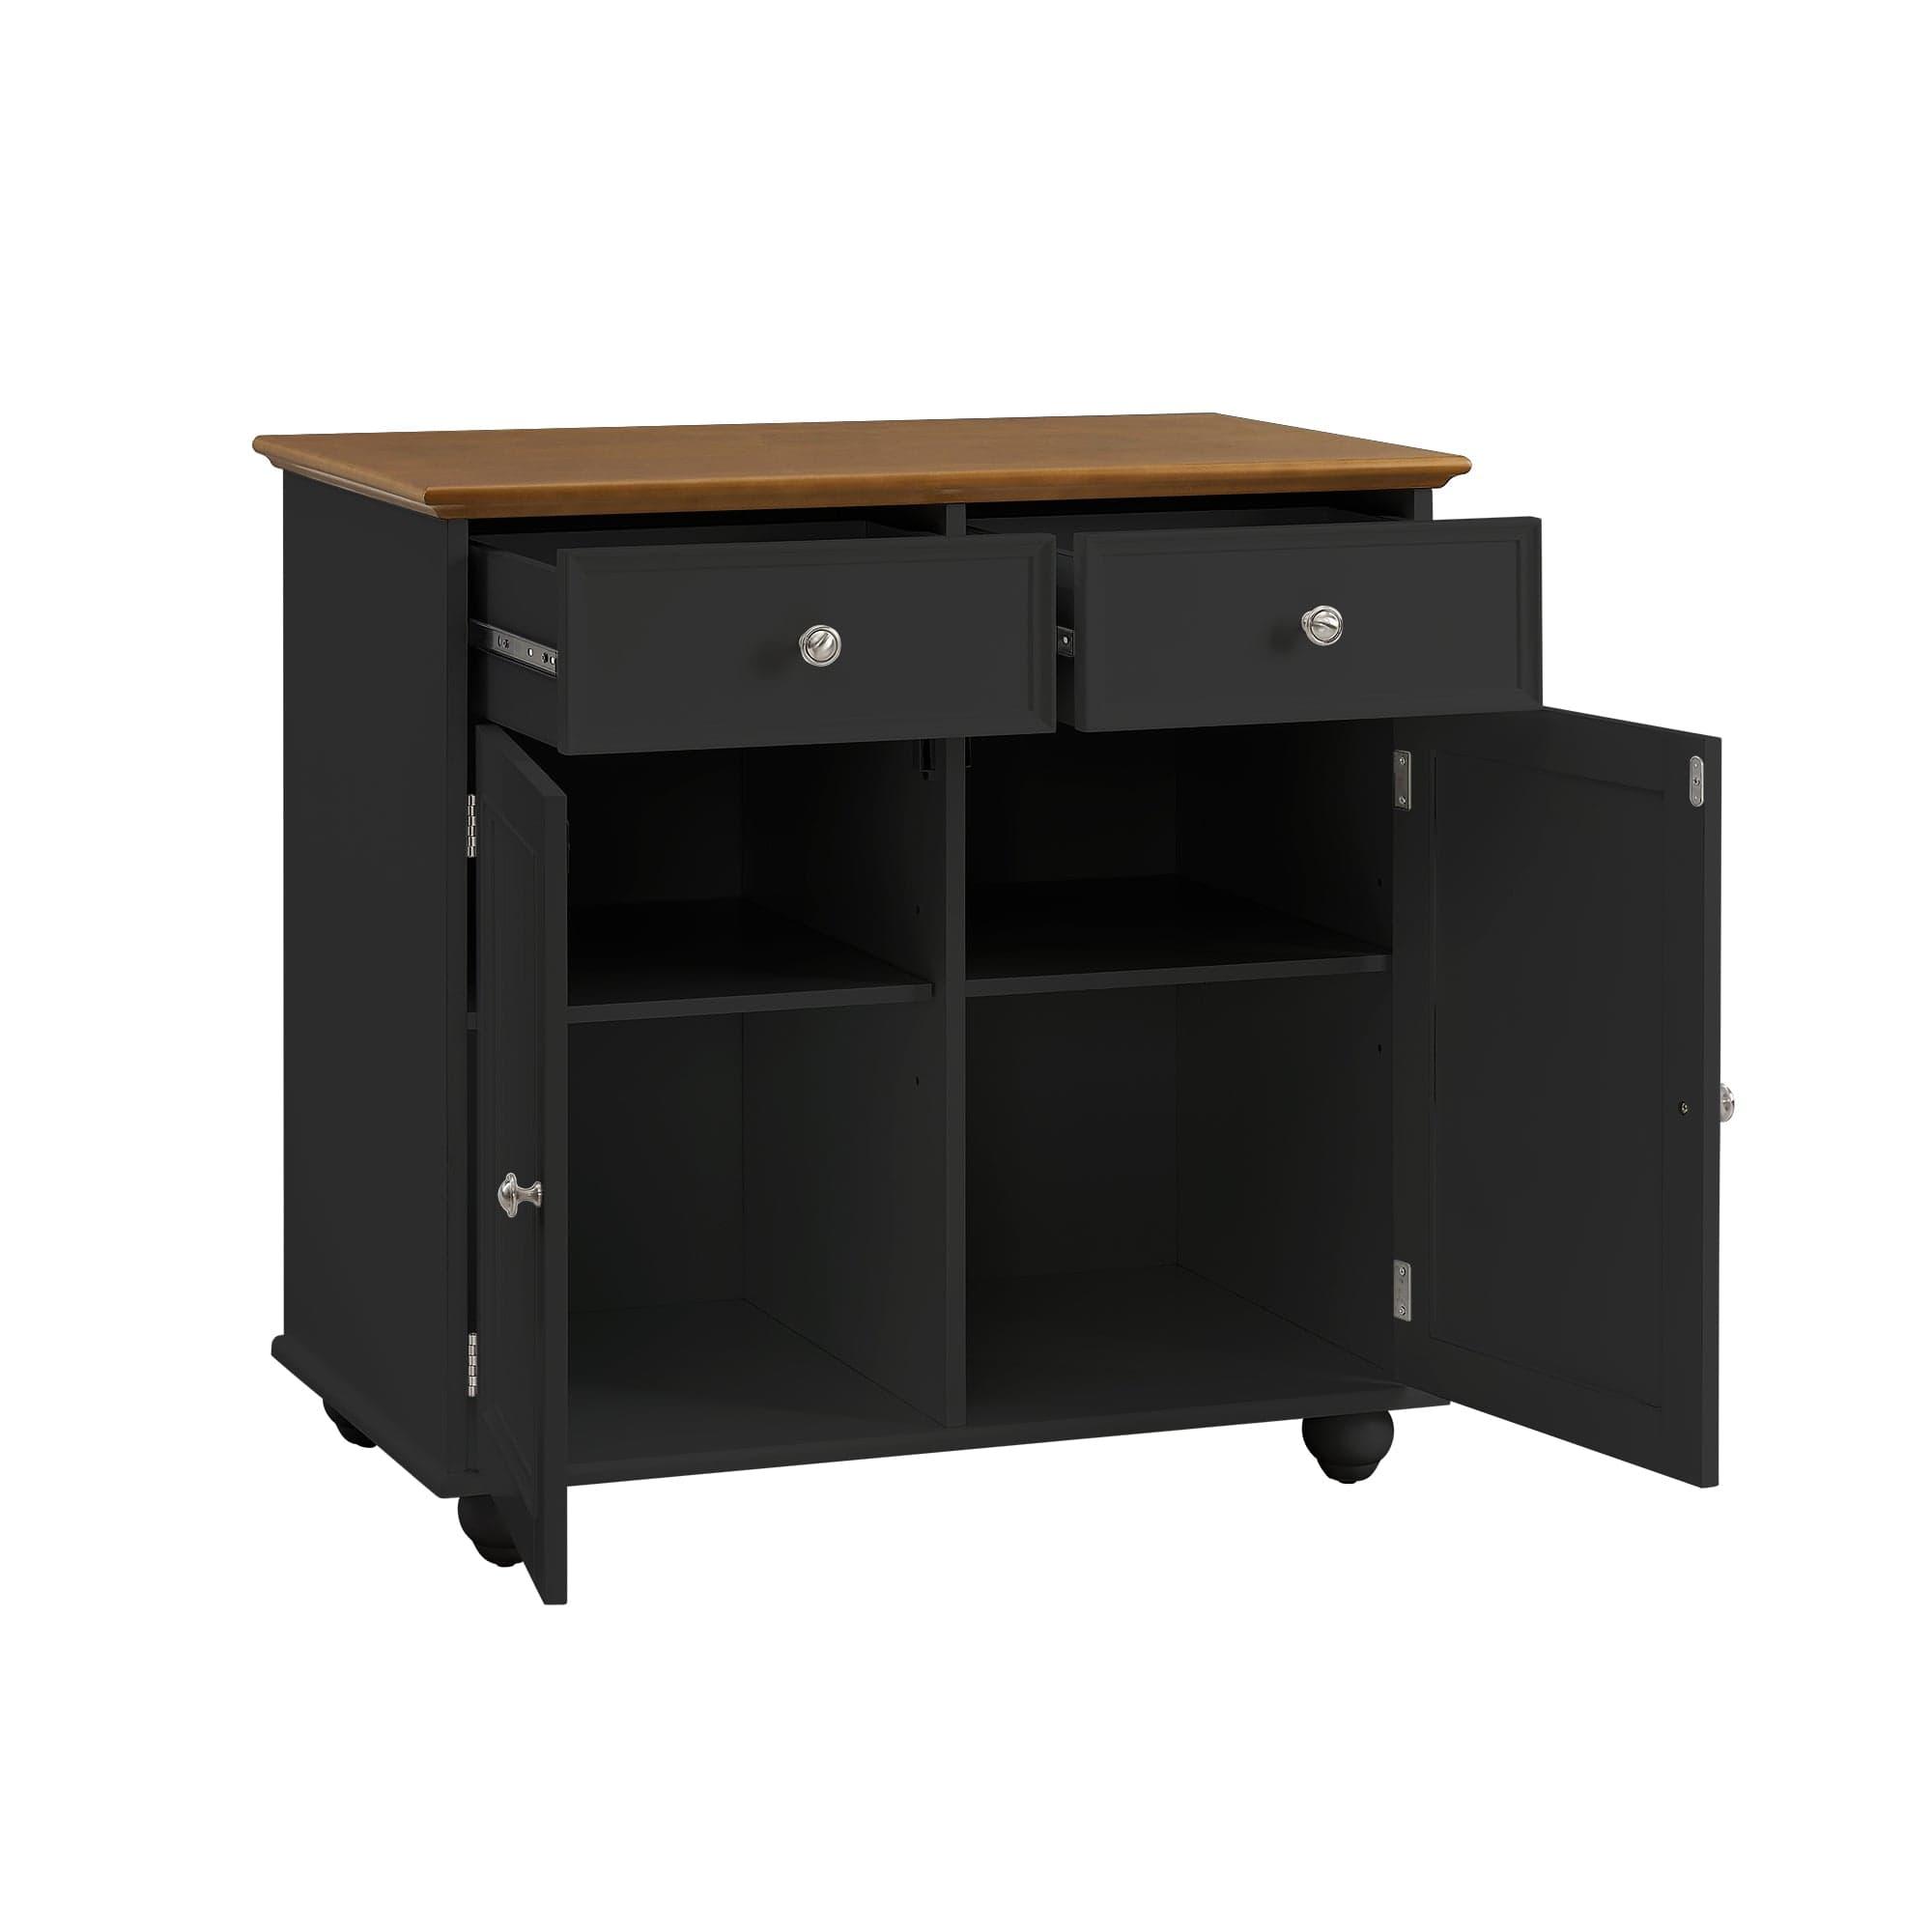 Shop Modern Sideboard Buffet Cabinet with Storage Cabinets, Drawers and Shelves for Living Room, Kitchen, Black Mademoiselle Home Decor